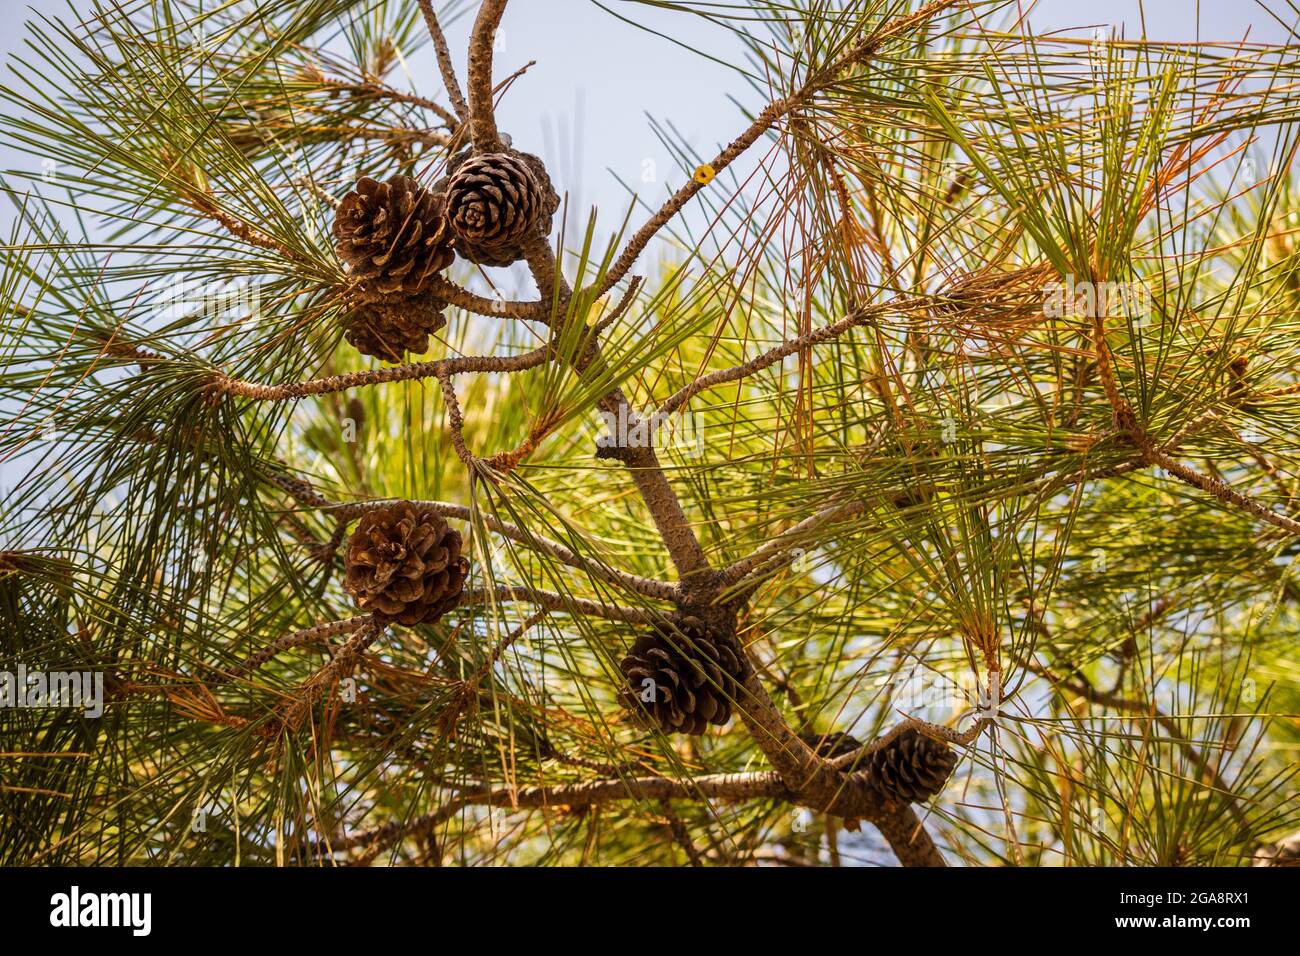 Cones on a tree during a sunny day with a blue sky Stock Photo